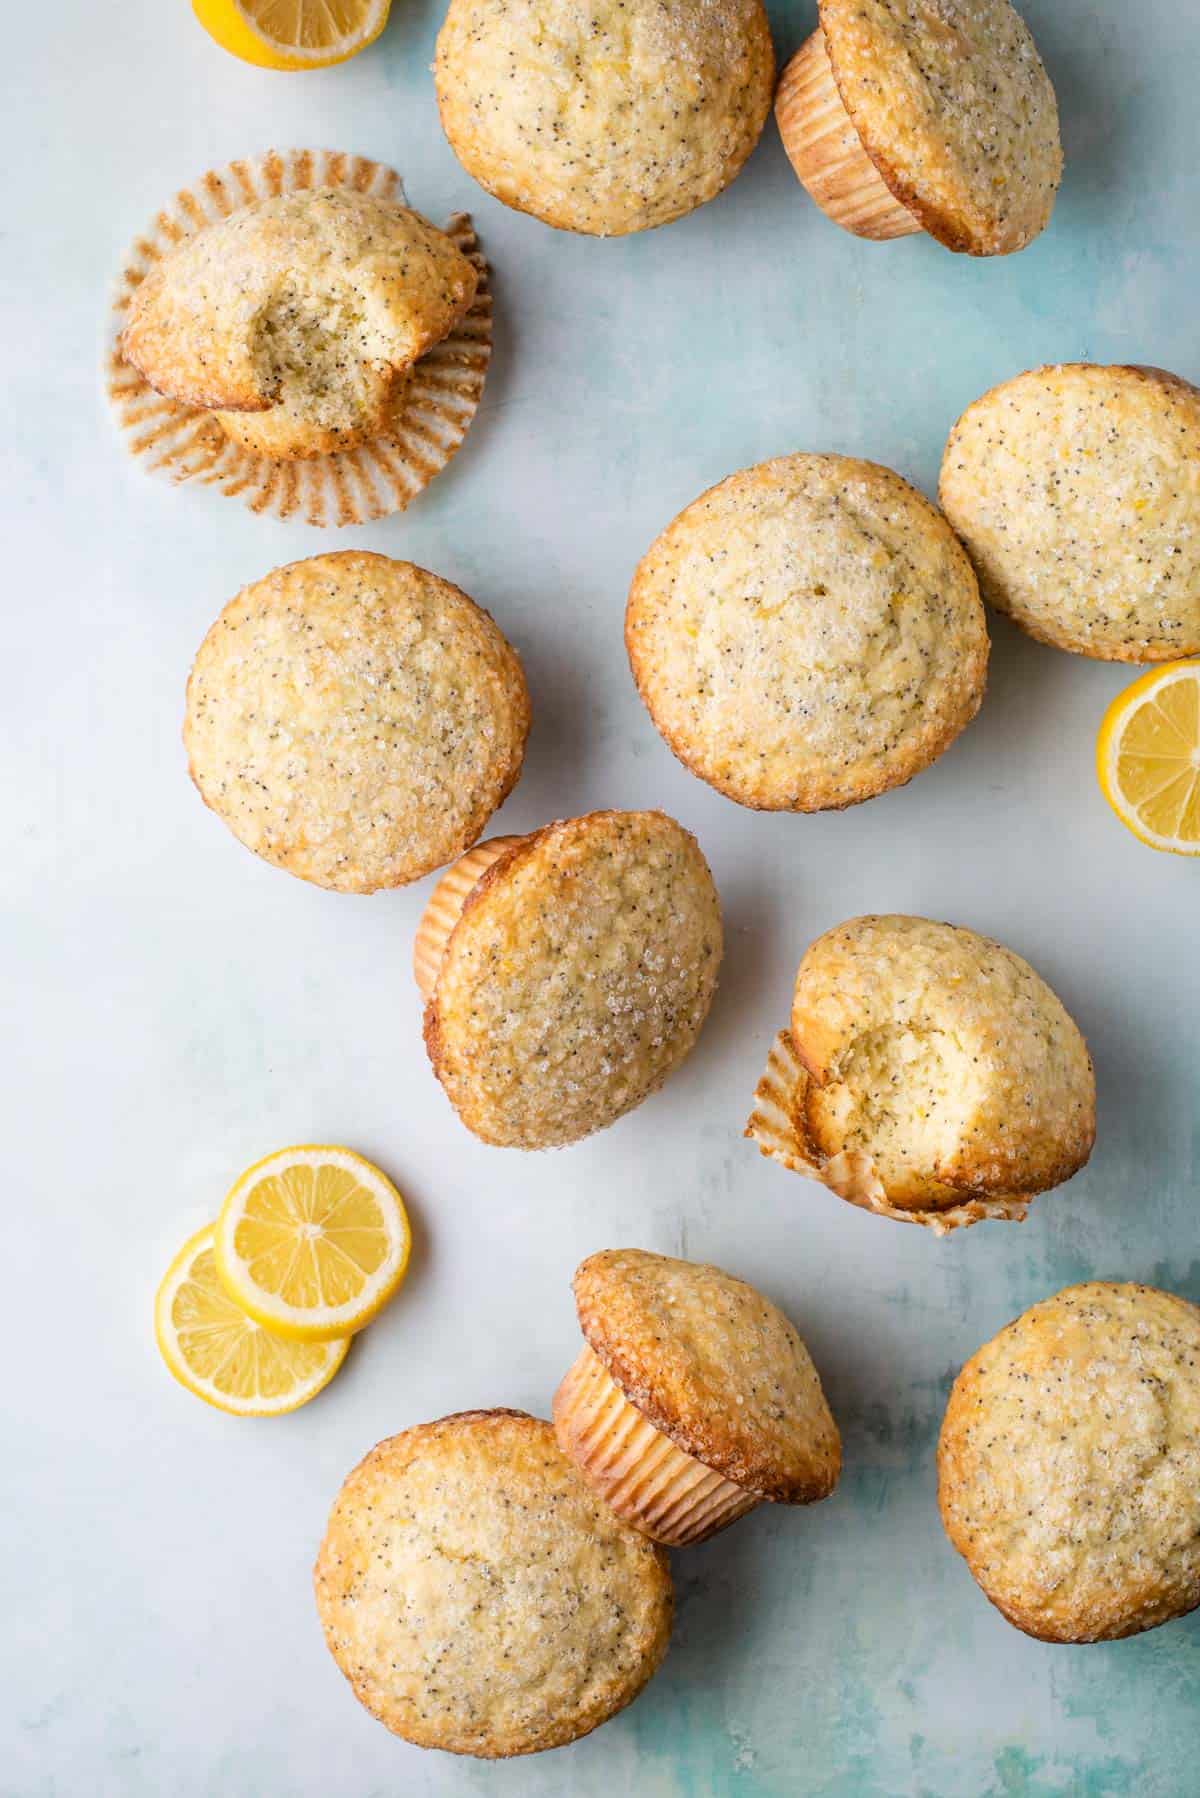 lemon poppy seed muffins arranged around, some on their sides and some sitting upright, surrounded by lemon slices